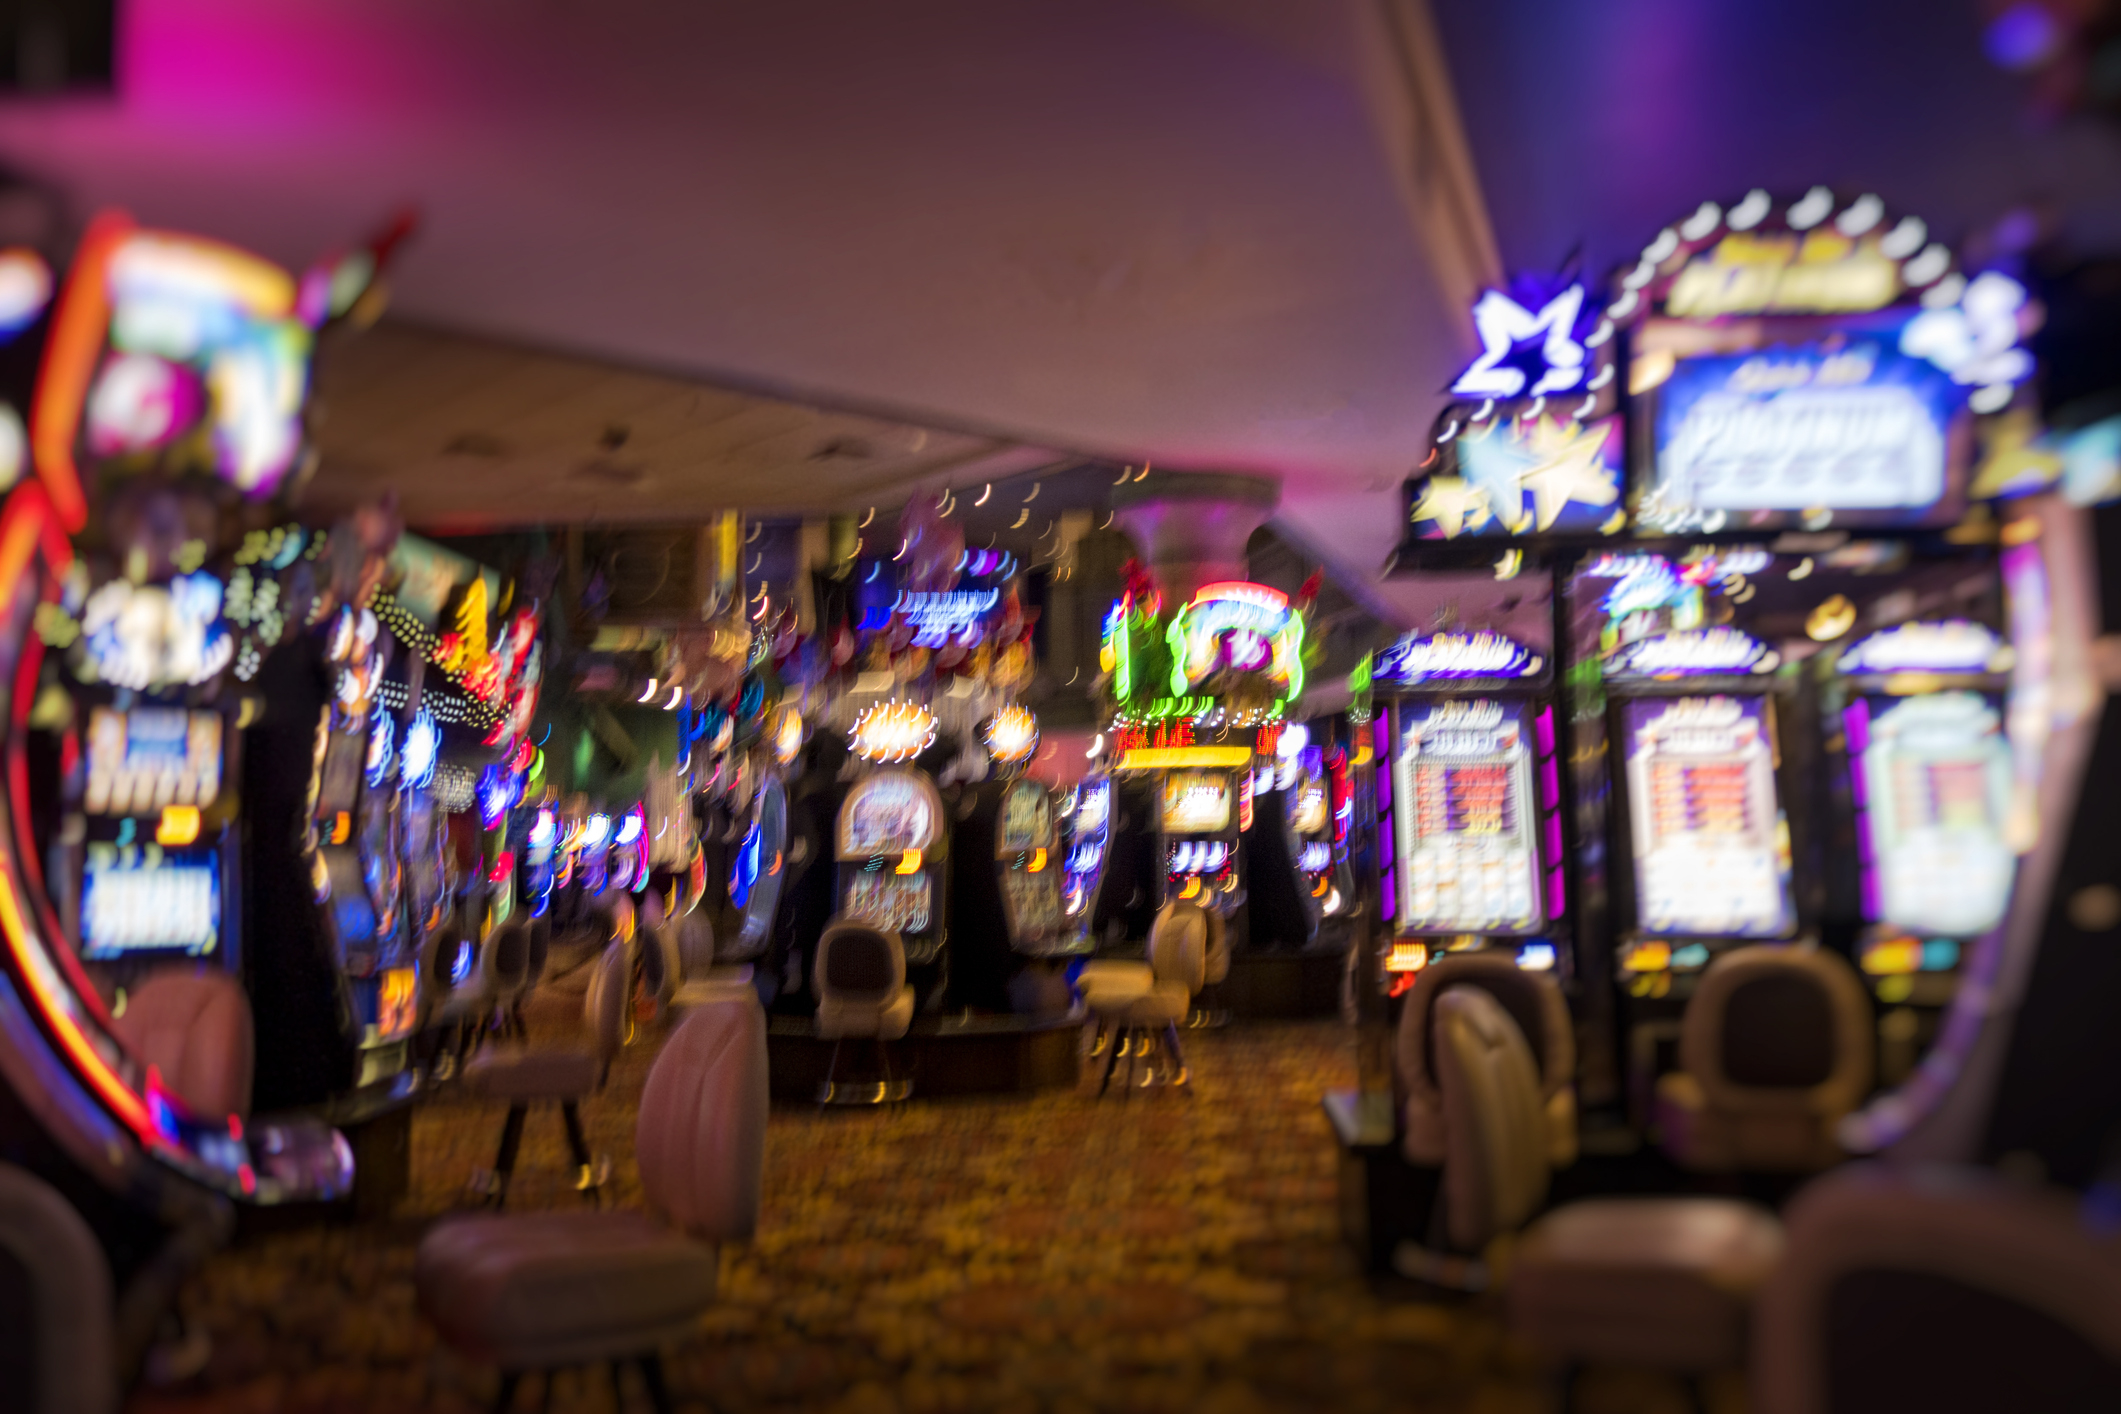 Blurred casino interior with slot machines and no identifiable people